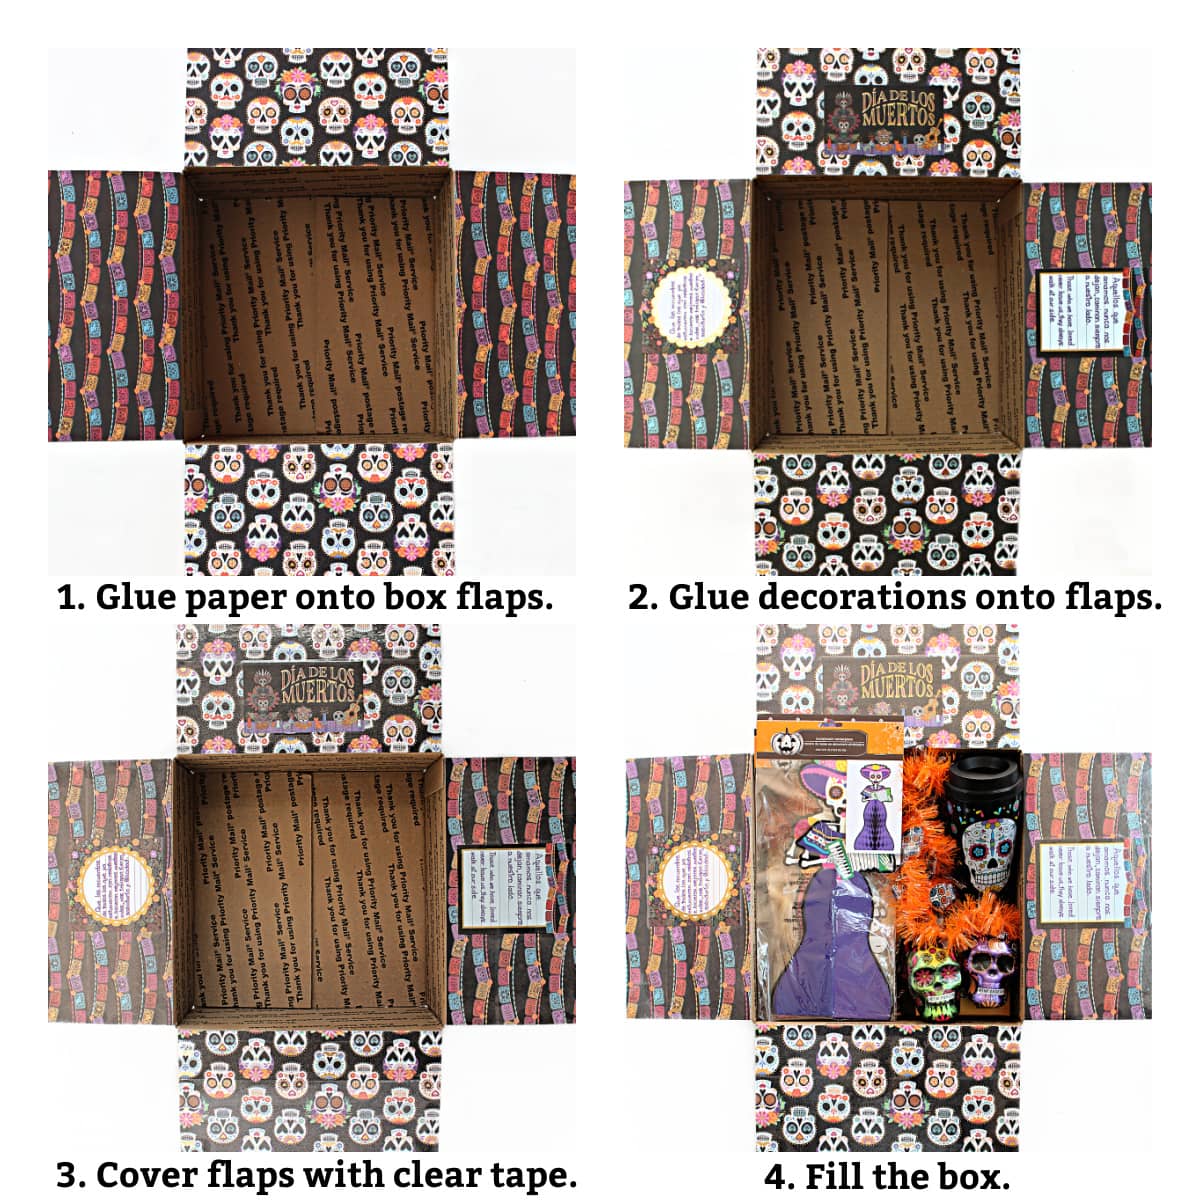 Decorating instructions: glue paper onto flaps, glue decorations onto flaps, cover flaps with tape, fill box.